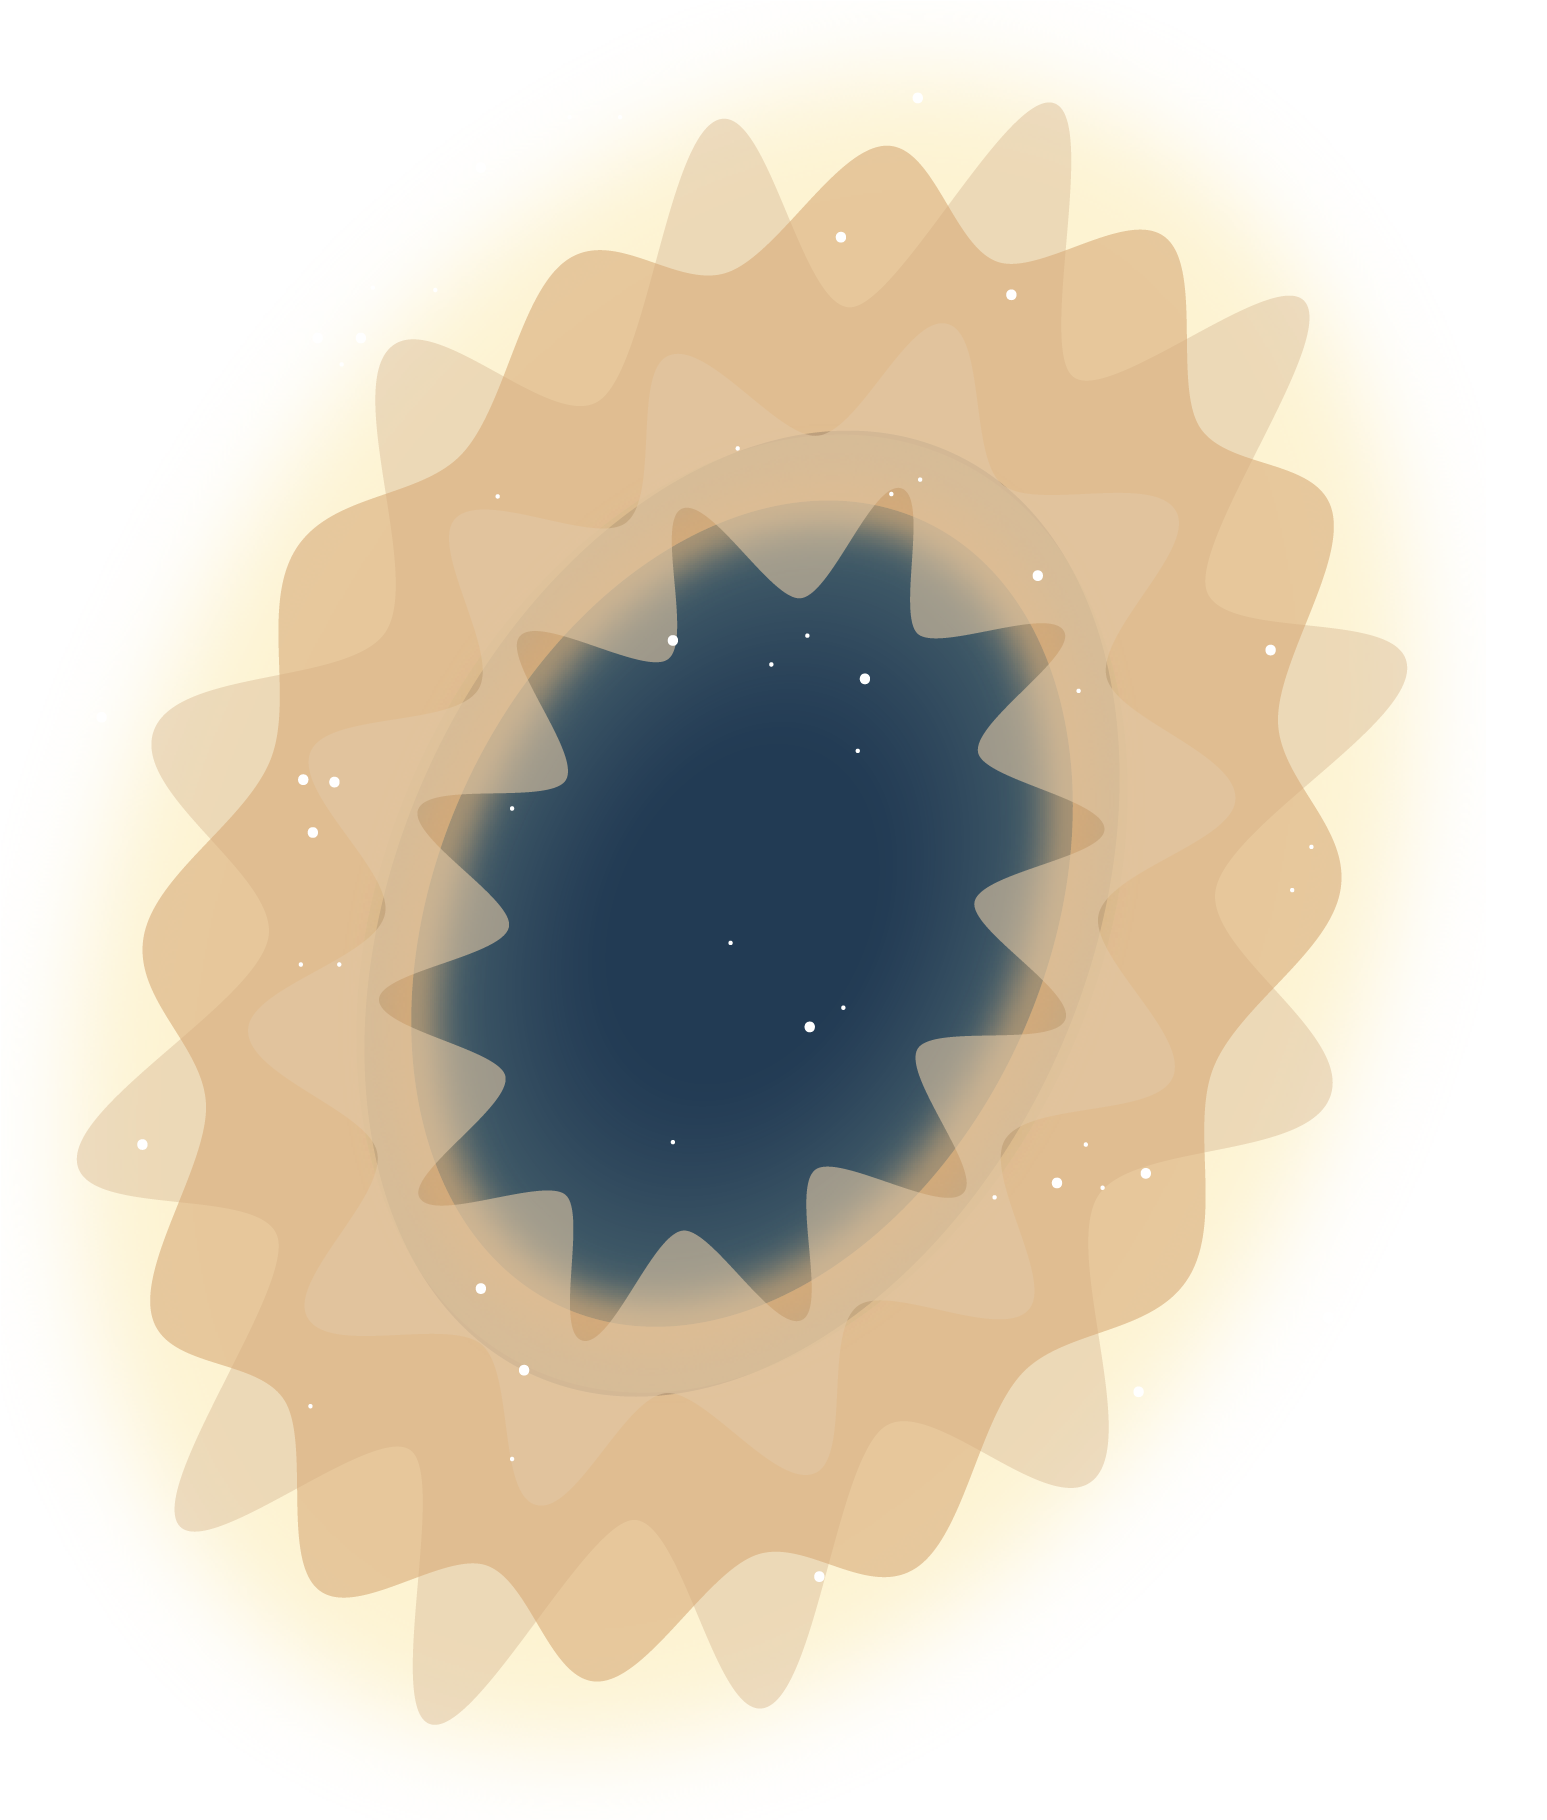 A large oval shape on an angled tilt with rounded waves around the edge, this graphic has a flower-like appearance. Smaller transparent circles with the same wavy edge are layered inward to create an inner starburst shape. The outer rings are a very yellow green color and they move inward into different light orange colors and finally to a center oval shape that is a dark blue and appears like a starburst because of the waved outlines that lay on top. White dots representing stars speckle the image.